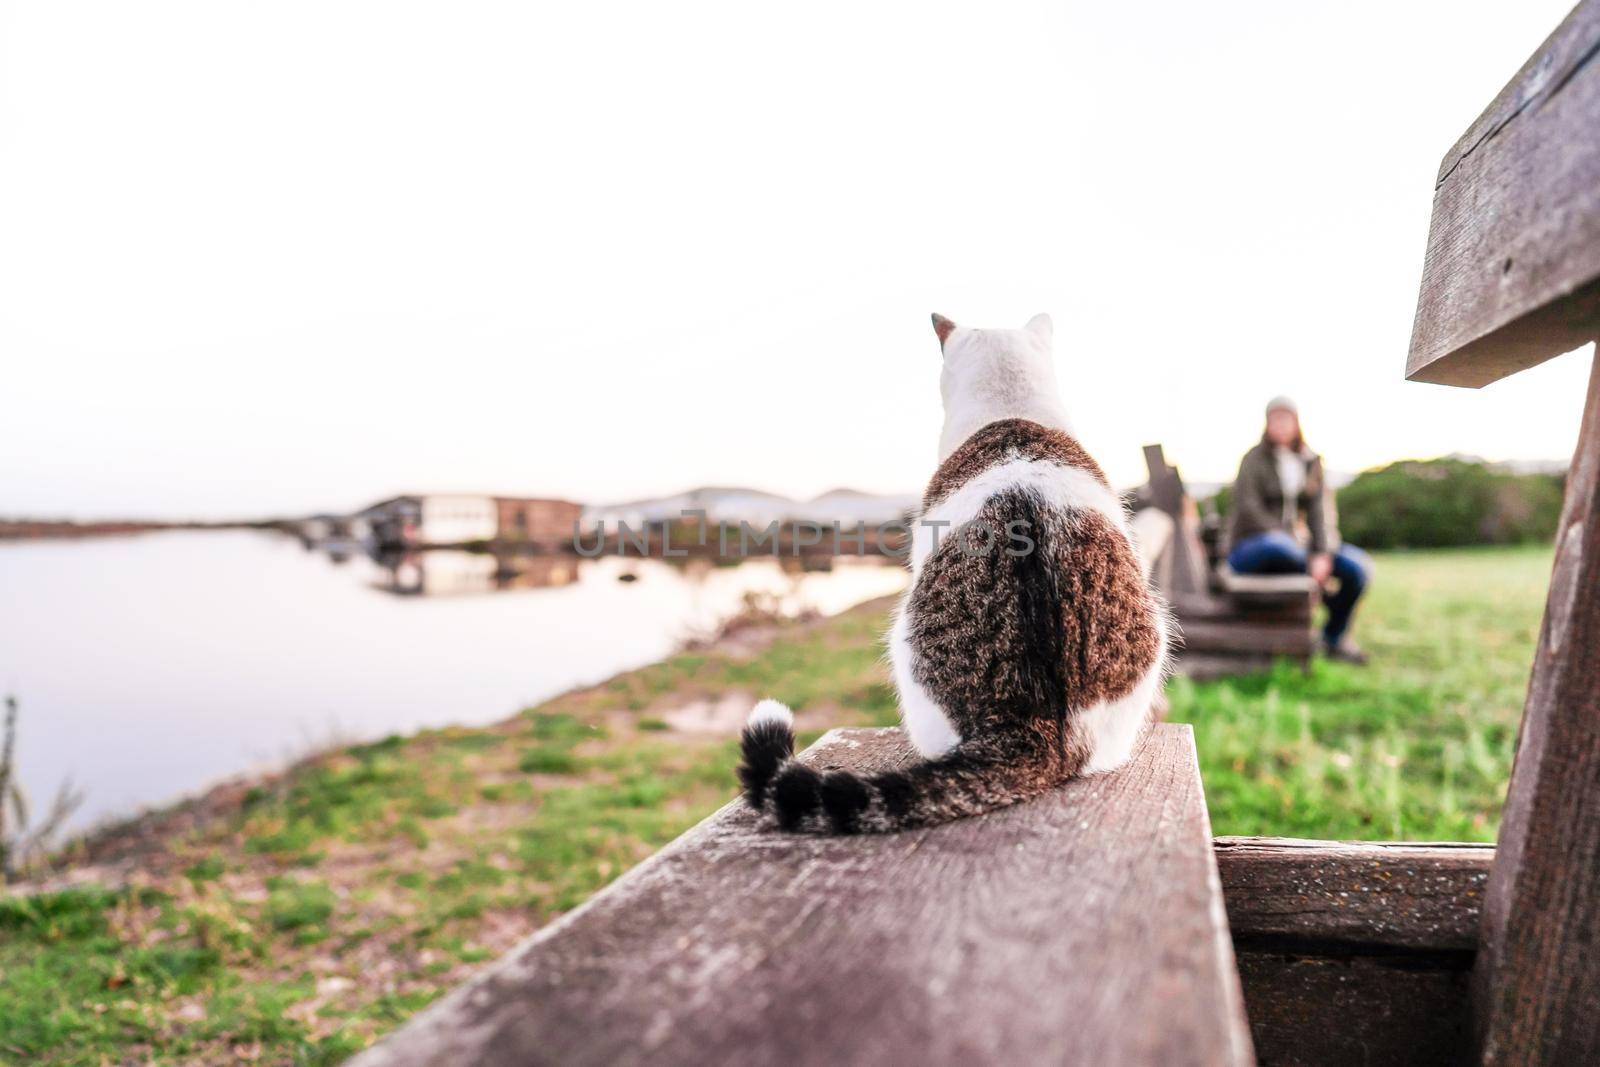 Close-up of a cat from behind sitting on a bench by a lake facing a blurred woman sitting in the background looking at him - Concept of cats as animals independent of humans - Selective focus on cat by robbyfontanesi